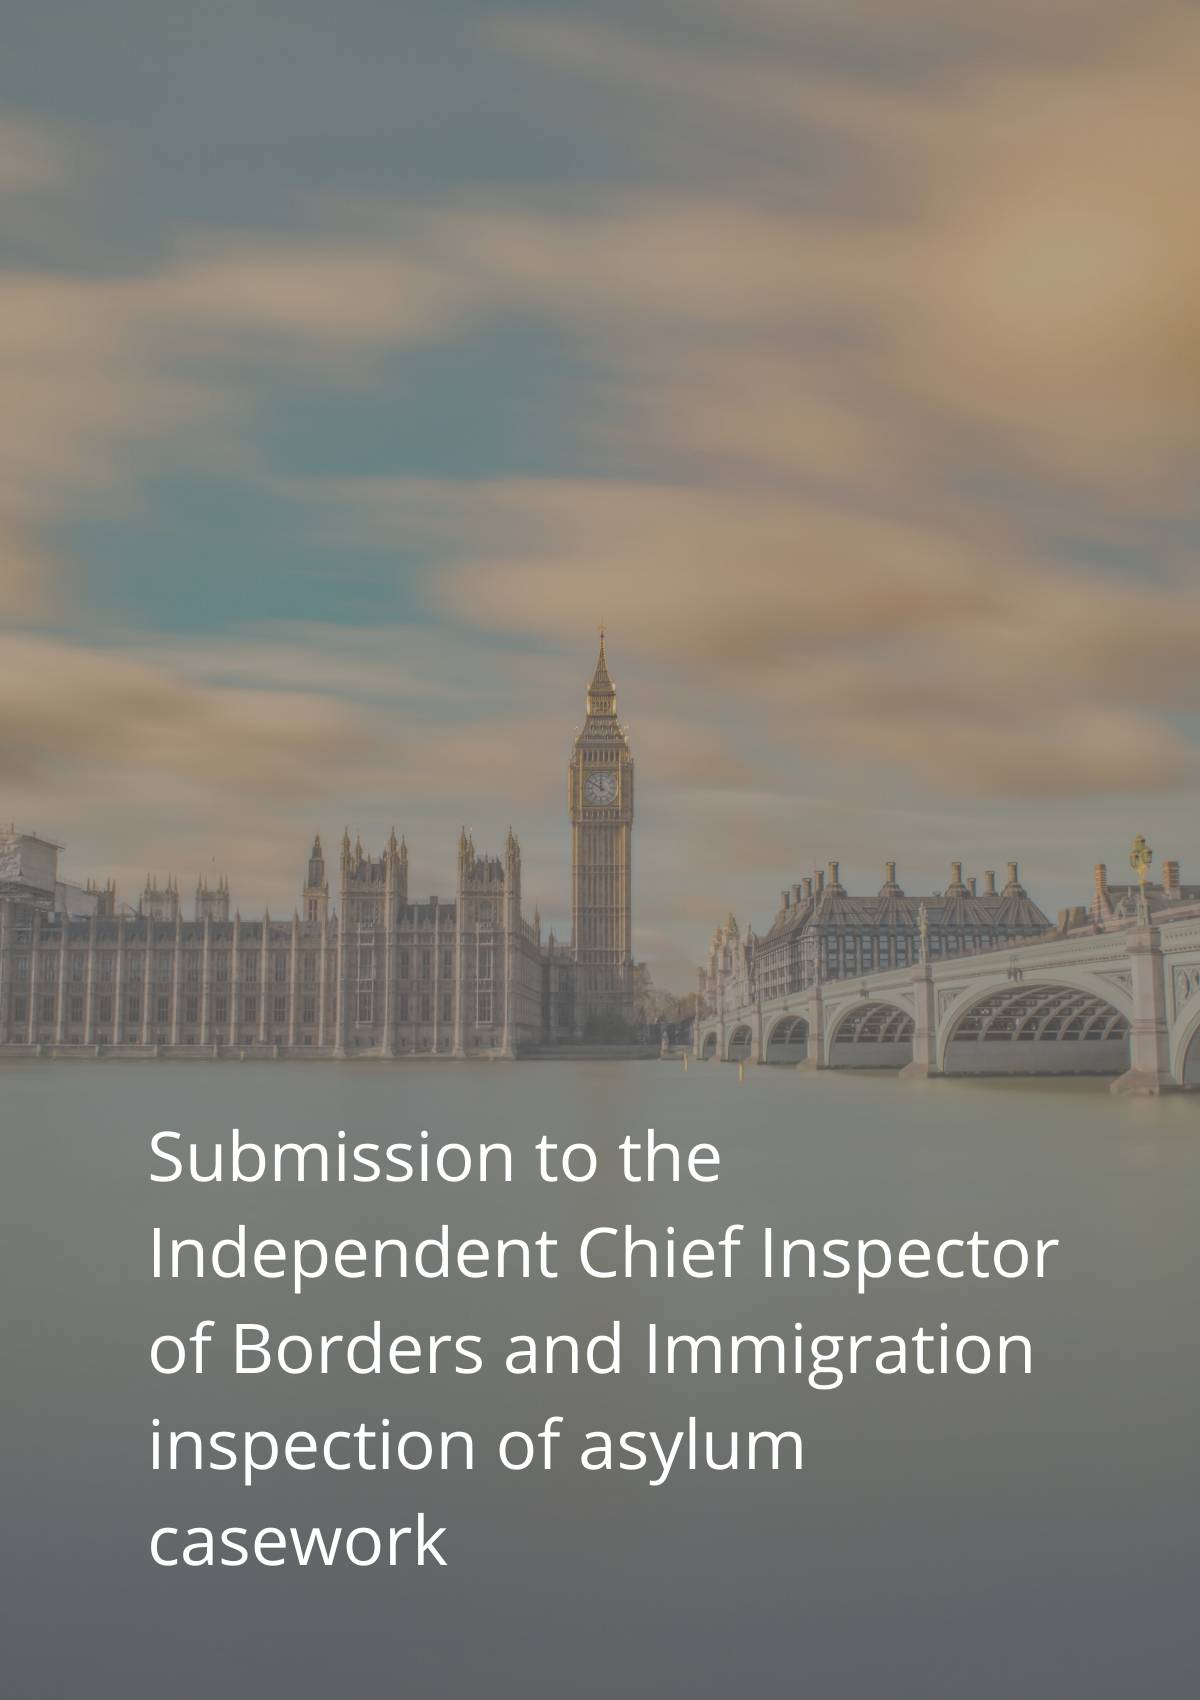 Submission to the independent chief inspector of borders and immigration of asylum casework.